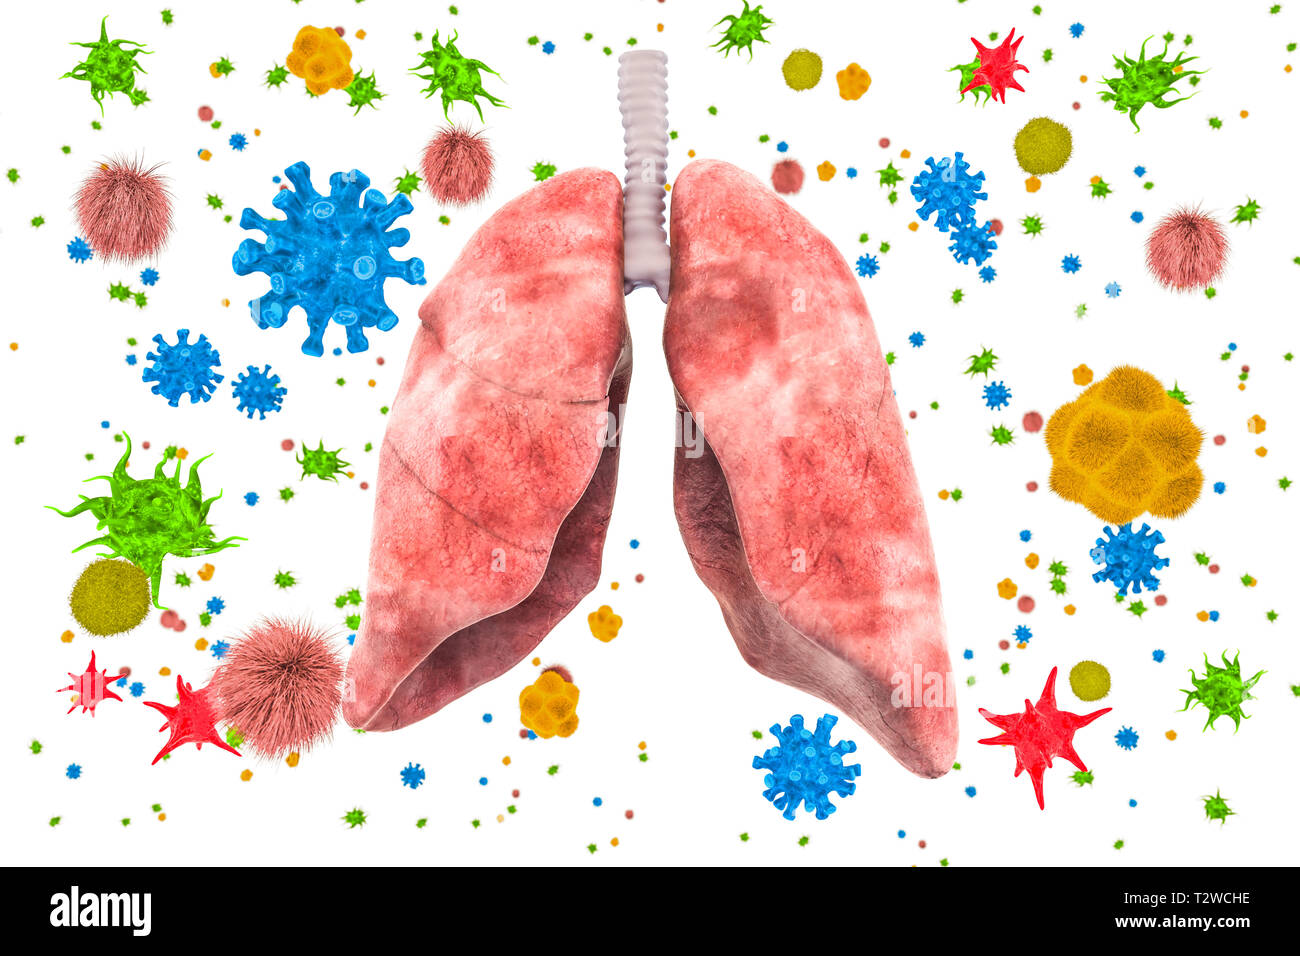 Lungs with viruses and bacteria. Lungs disease, infection concept, 3D rendering isolated on white background Stock Photo